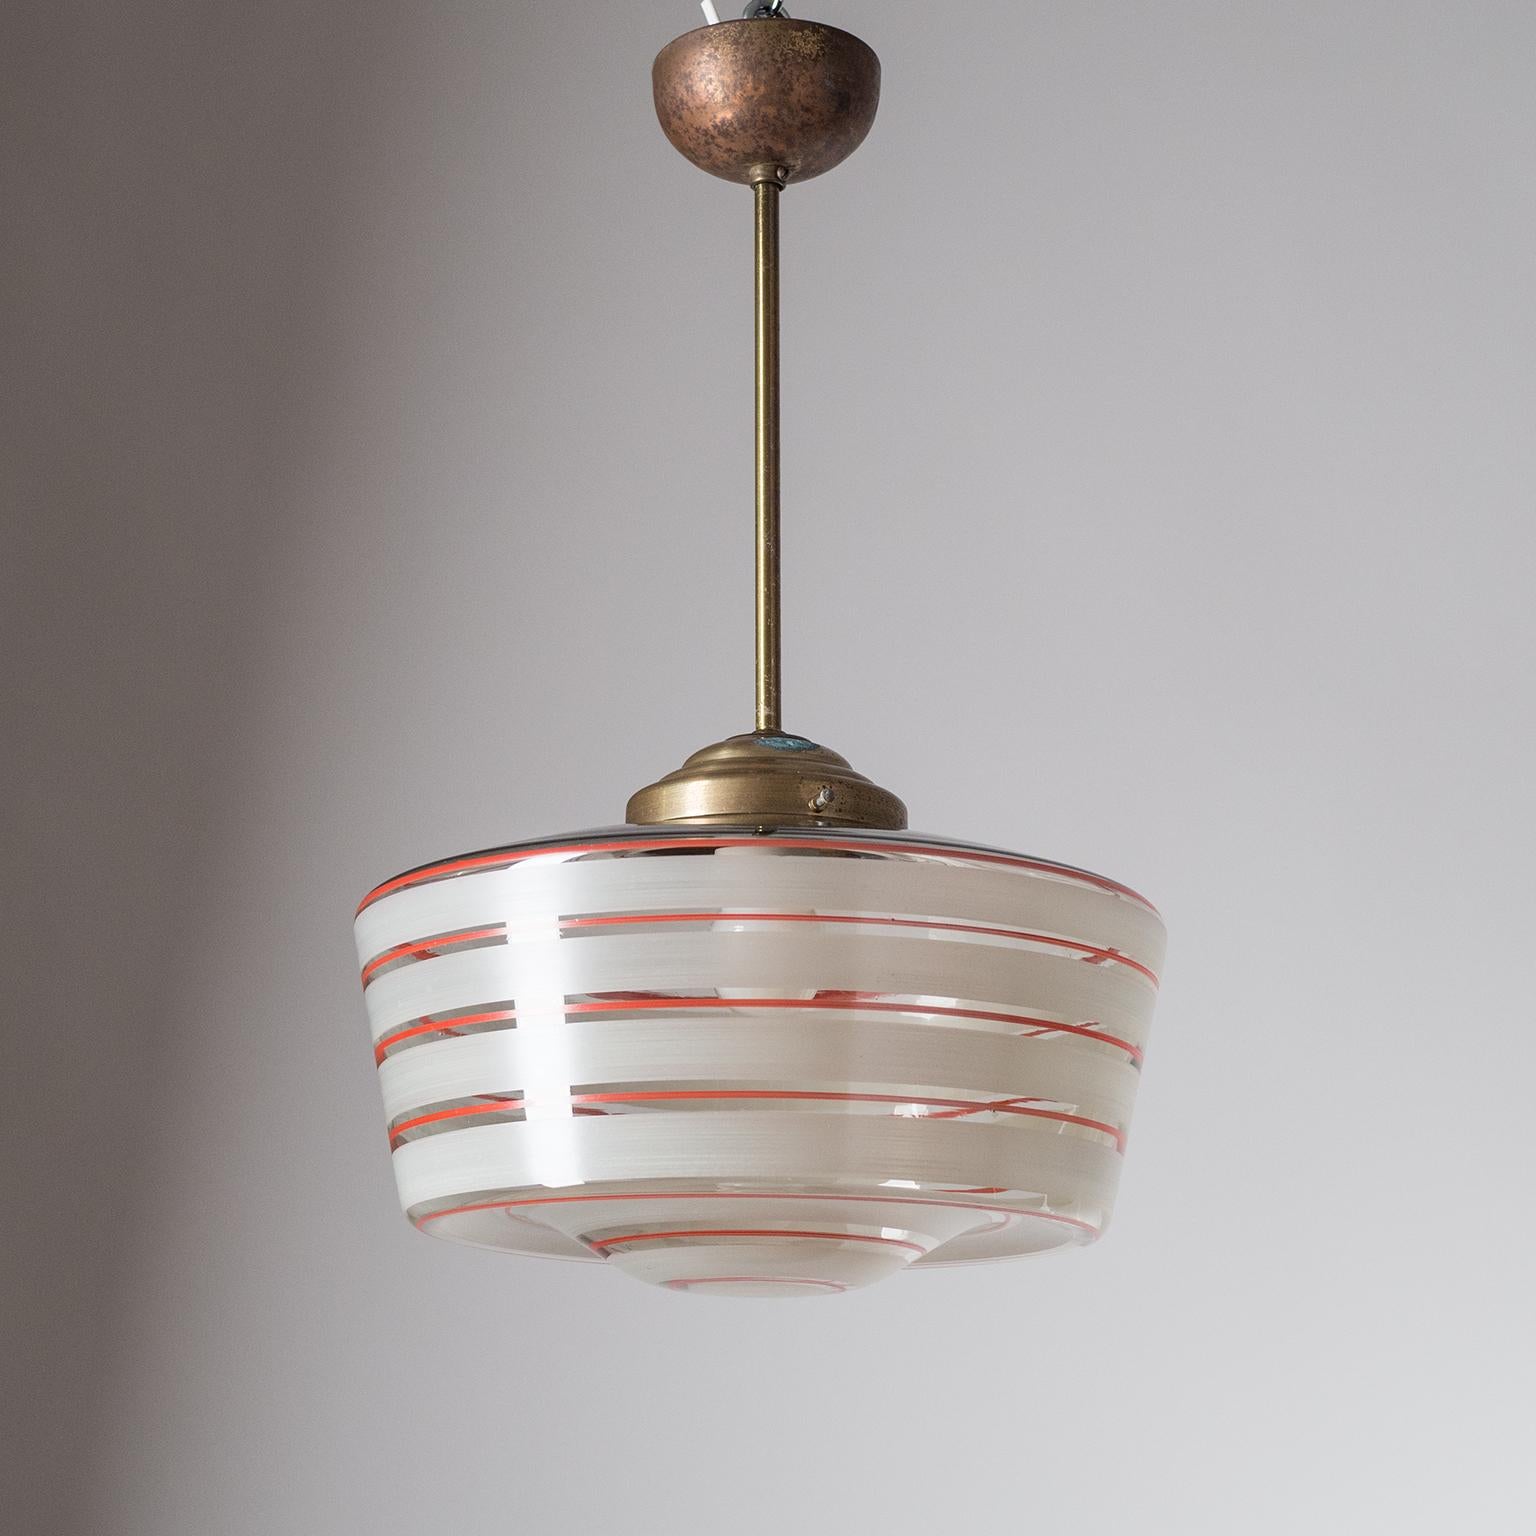 Rare hand painted glass Art Deco pendant, circa 1930. The large blown glass diffuser is enameled with off-white and red stripes which were applied by hand, the texture and varying thickness of brush strokes visible. The hardware is made of brass